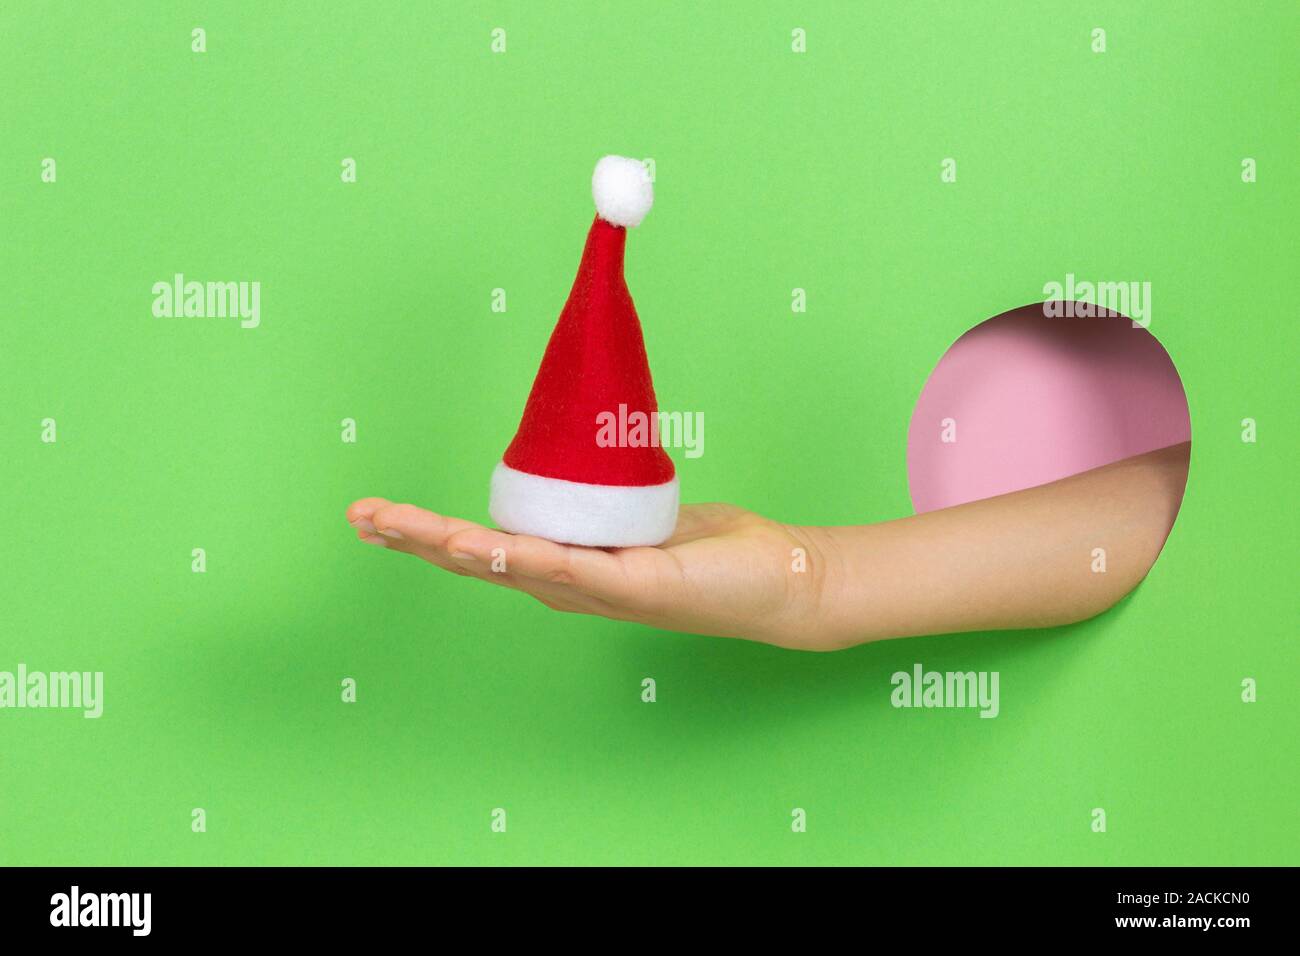 Hand through hole in light green background holding small red Christmas Santa Claus hat Stock Photo